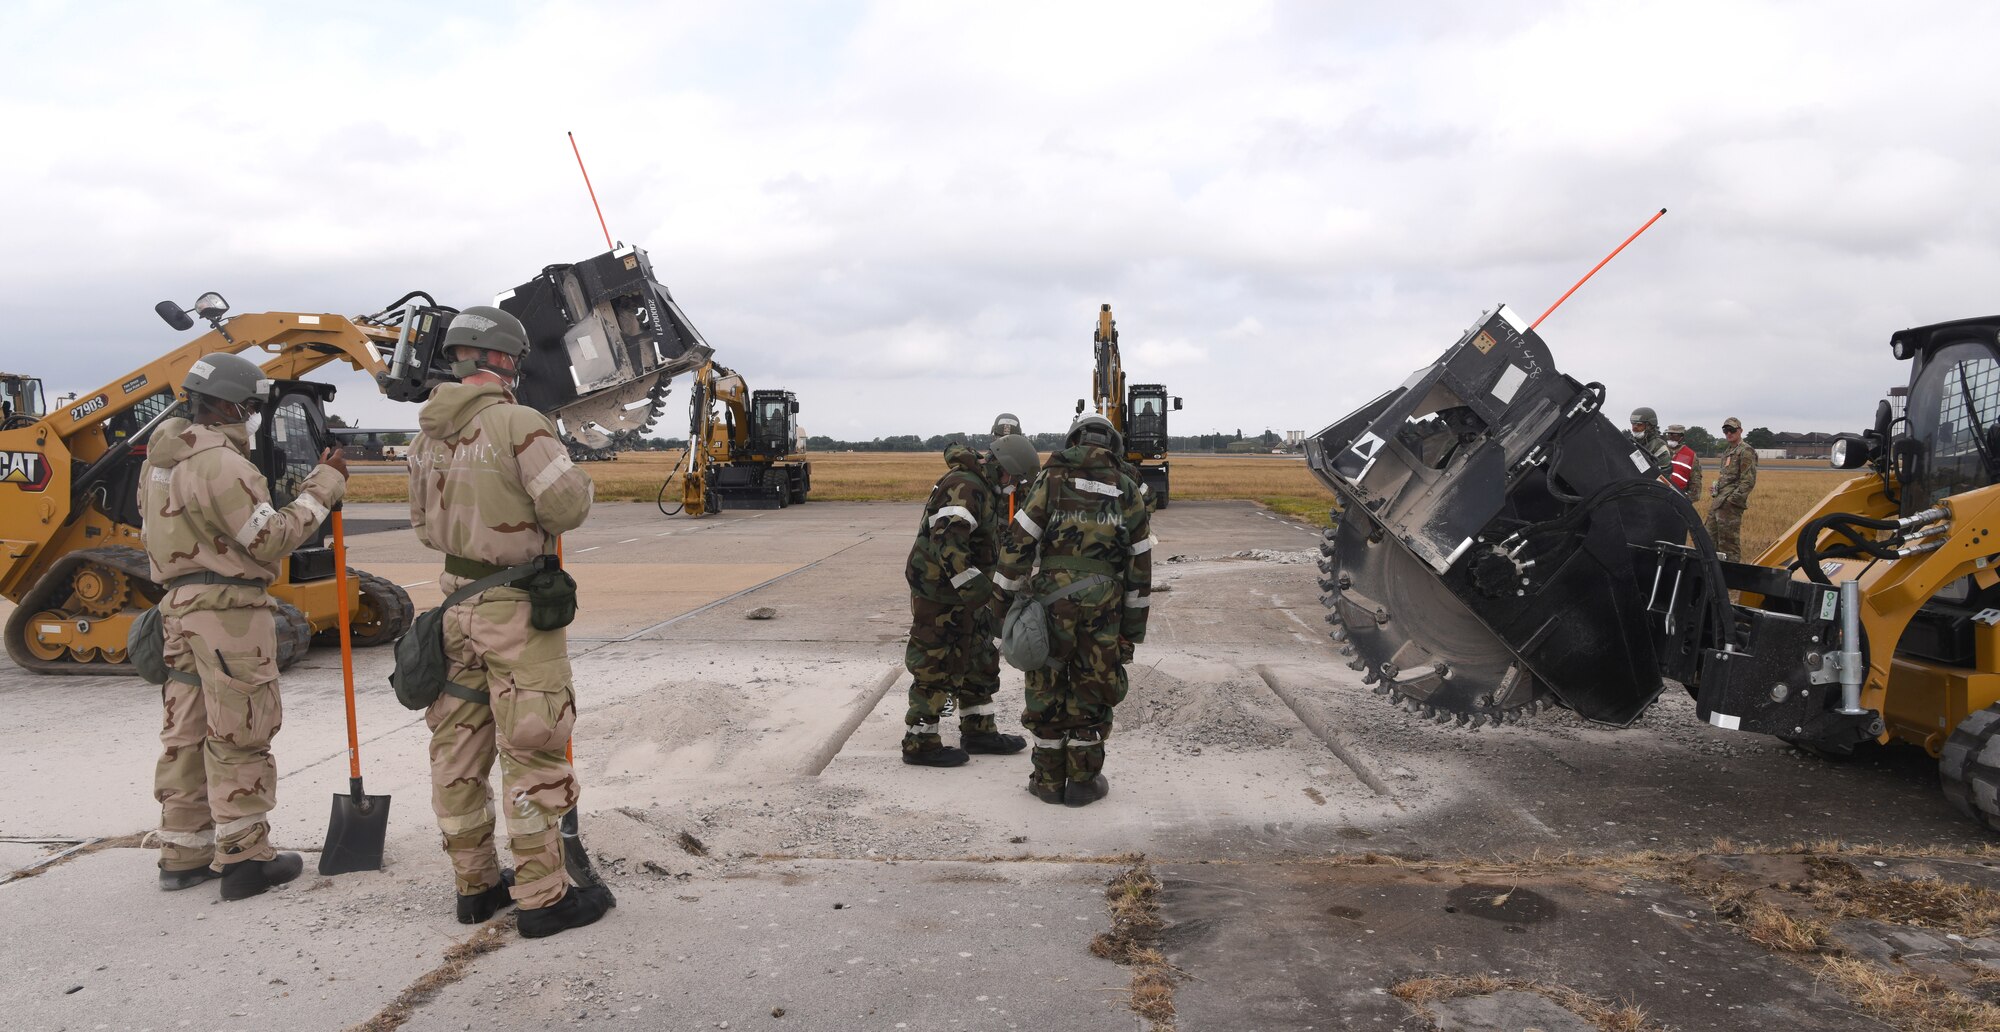 U.S. Air Force Airmen from the 100th Civil Engineer Squadron prepare to clear broken concrete cut by two compact track loaders during a simulated runway repair as part of a a chemical, biological, radiological, nuclear and explosives exercise at Royal Air Force Mildenhall, England, Aug. 17, 2022. The Airmen used a variety of equipment including excavators and loaders to practice removing damaged concrete and base course on a simulated runway. They practiced repair, break up and removal of concrete, before mixing and pouring new, quick-drying concrete and levelling it, all while wearing mission-oriented protective postures gear. (U.S. Air Force photo by Karen Abeyasekere)